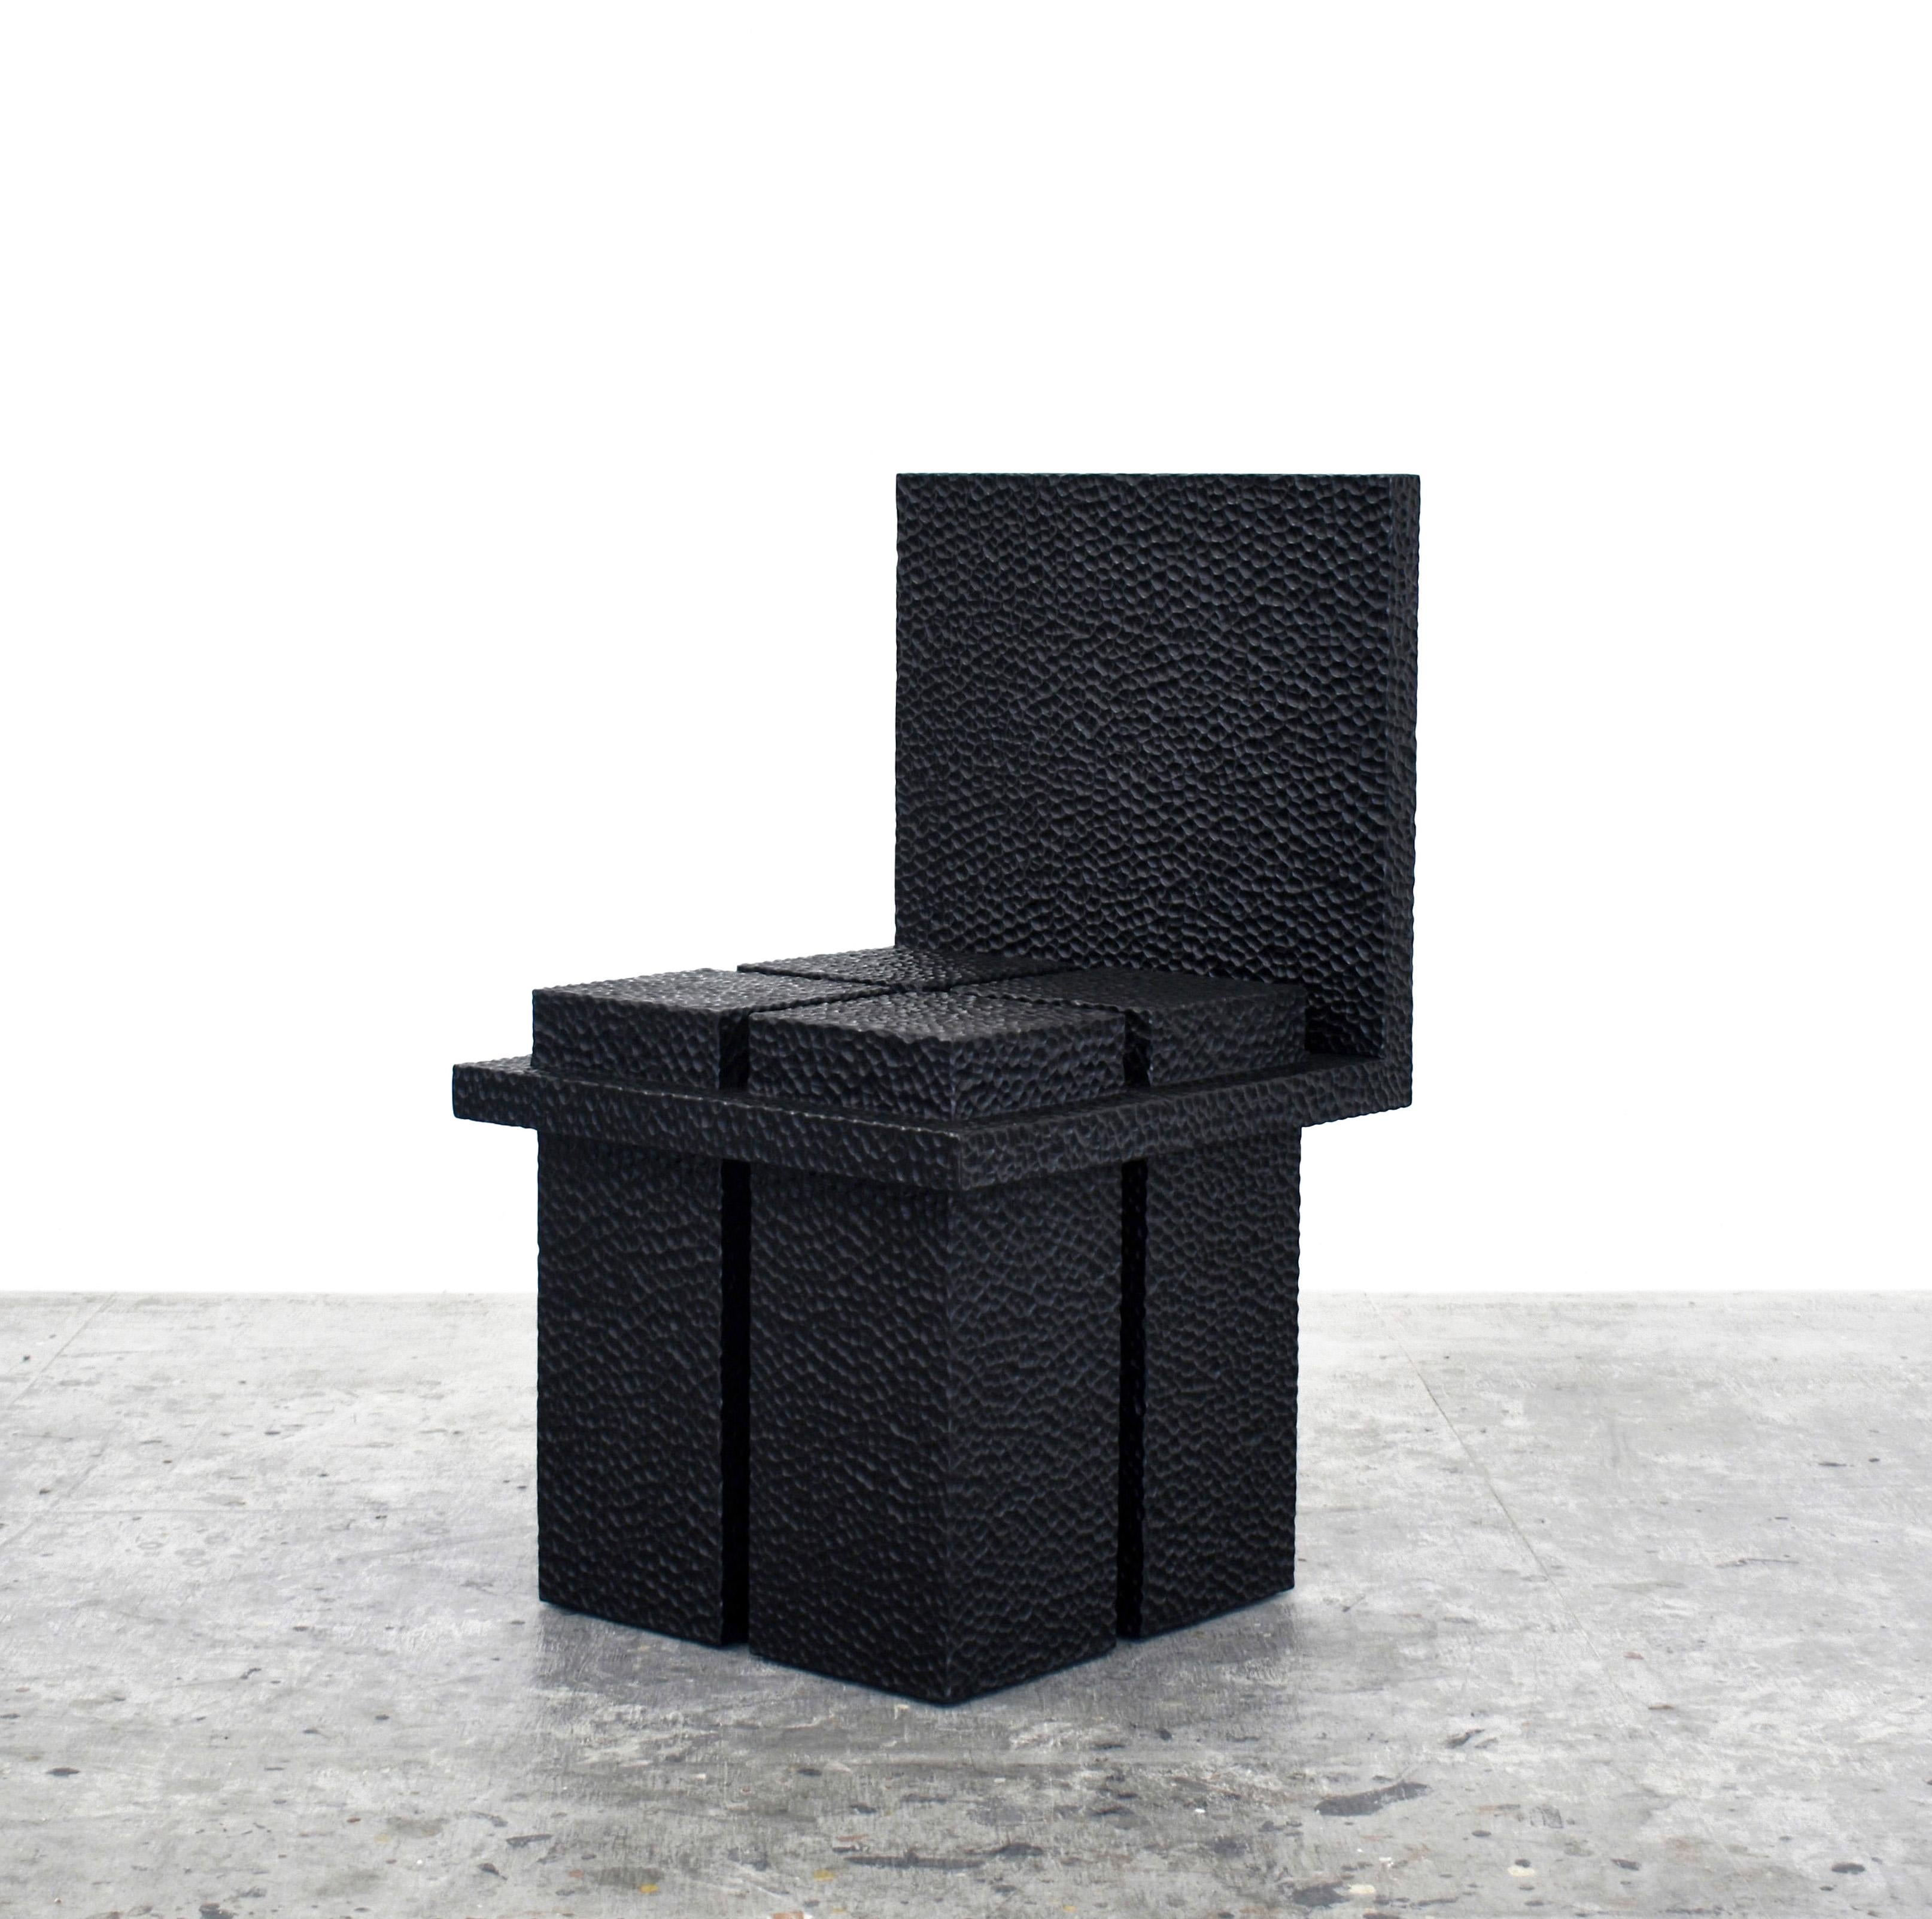 C3 chair by John Eric Byers
Dimensions: 49.5 x 45.8 x 77.5 cm
Materials: carved blackened maple

All works are individually handmade to order.

John Eric Byers creates geometrically inspired pieces that are minimal, emotional, and modernly